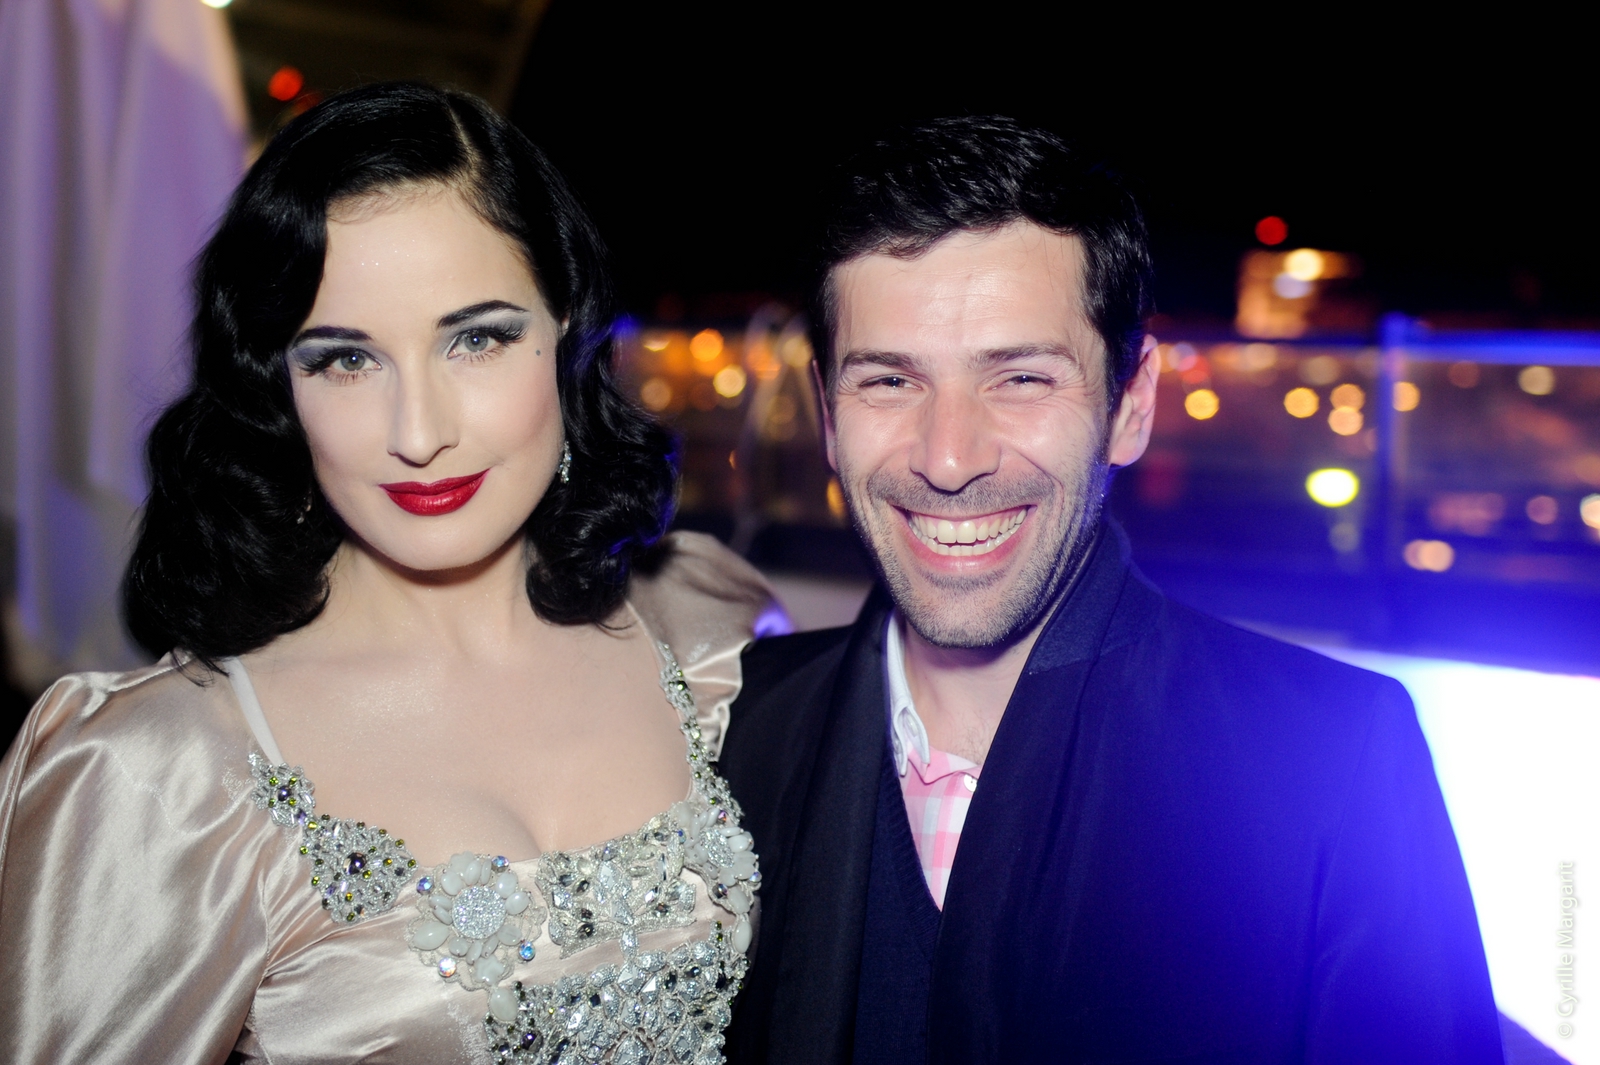 8. Dita Von Teese and Alexis Mabille at the Nikki Beach after party of Dita's show for Cointreau at the 2013 Cannes Film Festival 